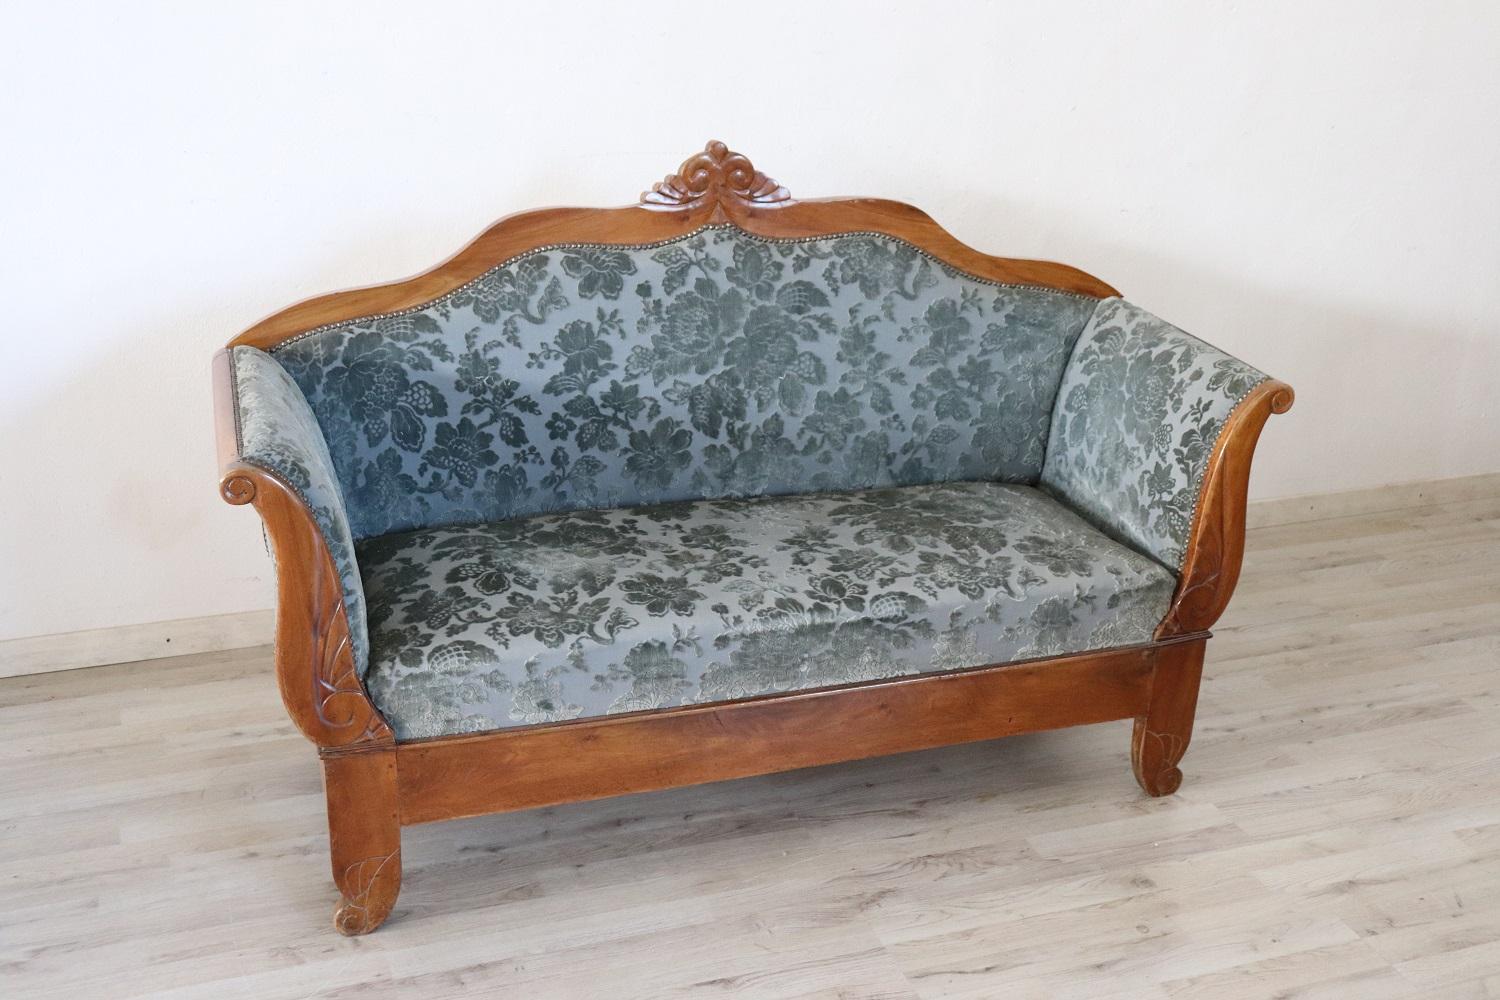 Antique settee 1825s in full Charles X era. The settee is made of solid walnut hand carved. Refined damask fabric in shades of blue. Excellent antique good conditions of the wood and fabric.